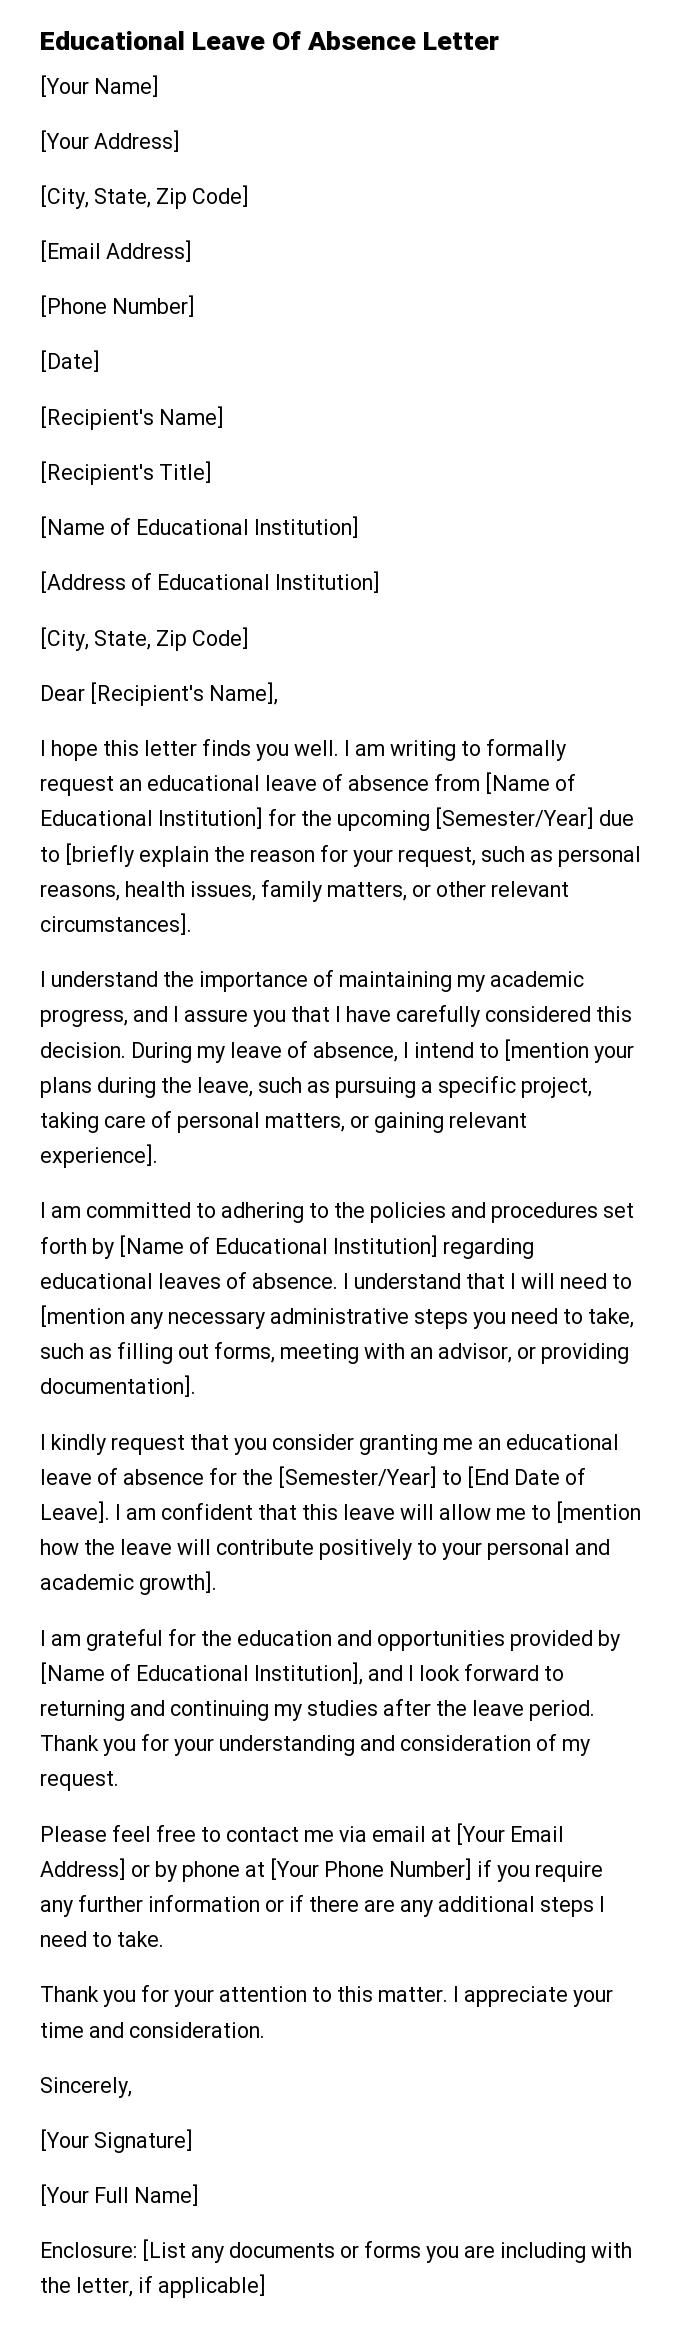 Educational Leave Of Absence Letter